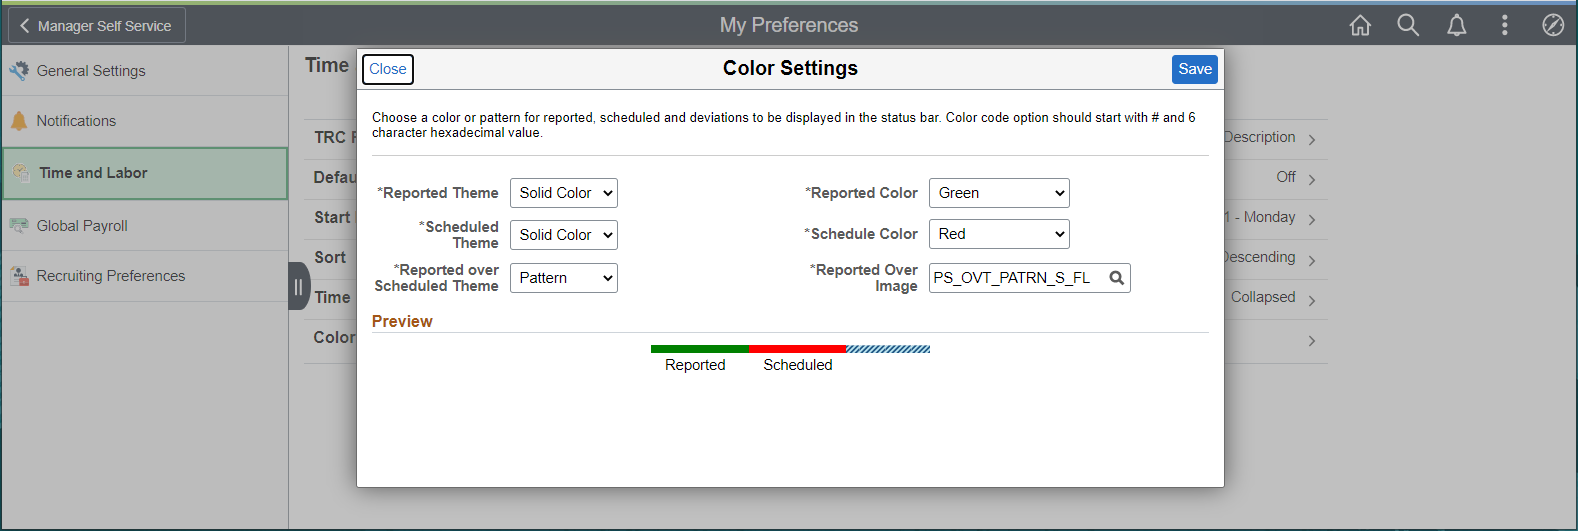 My Preferences_Color Settings